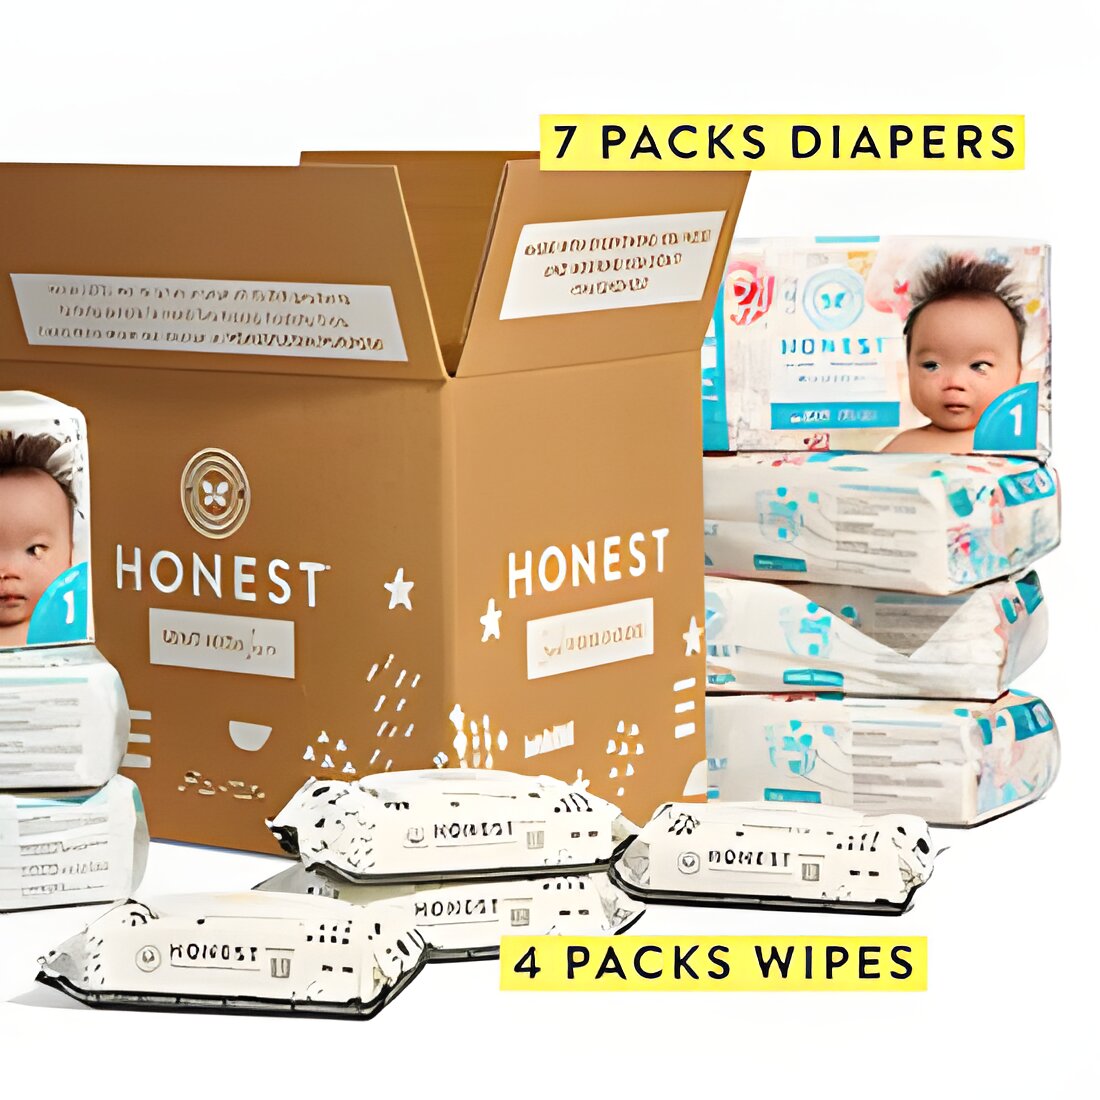 Free Honest Diapers + Wipes Boundle